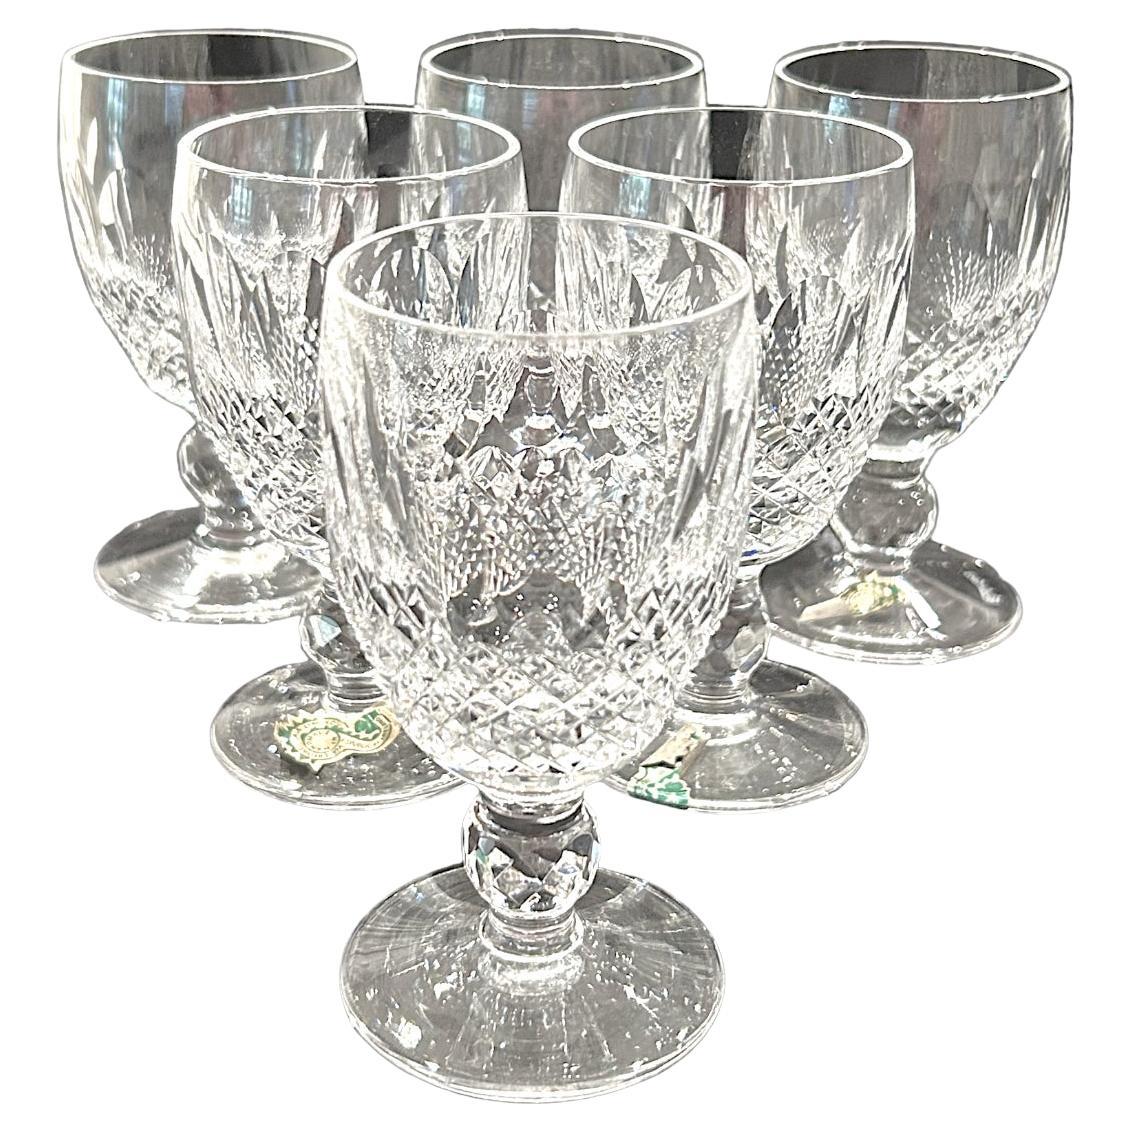 Vintage Waterford “Colleen” Claret Wine Glasses (Set of 6)